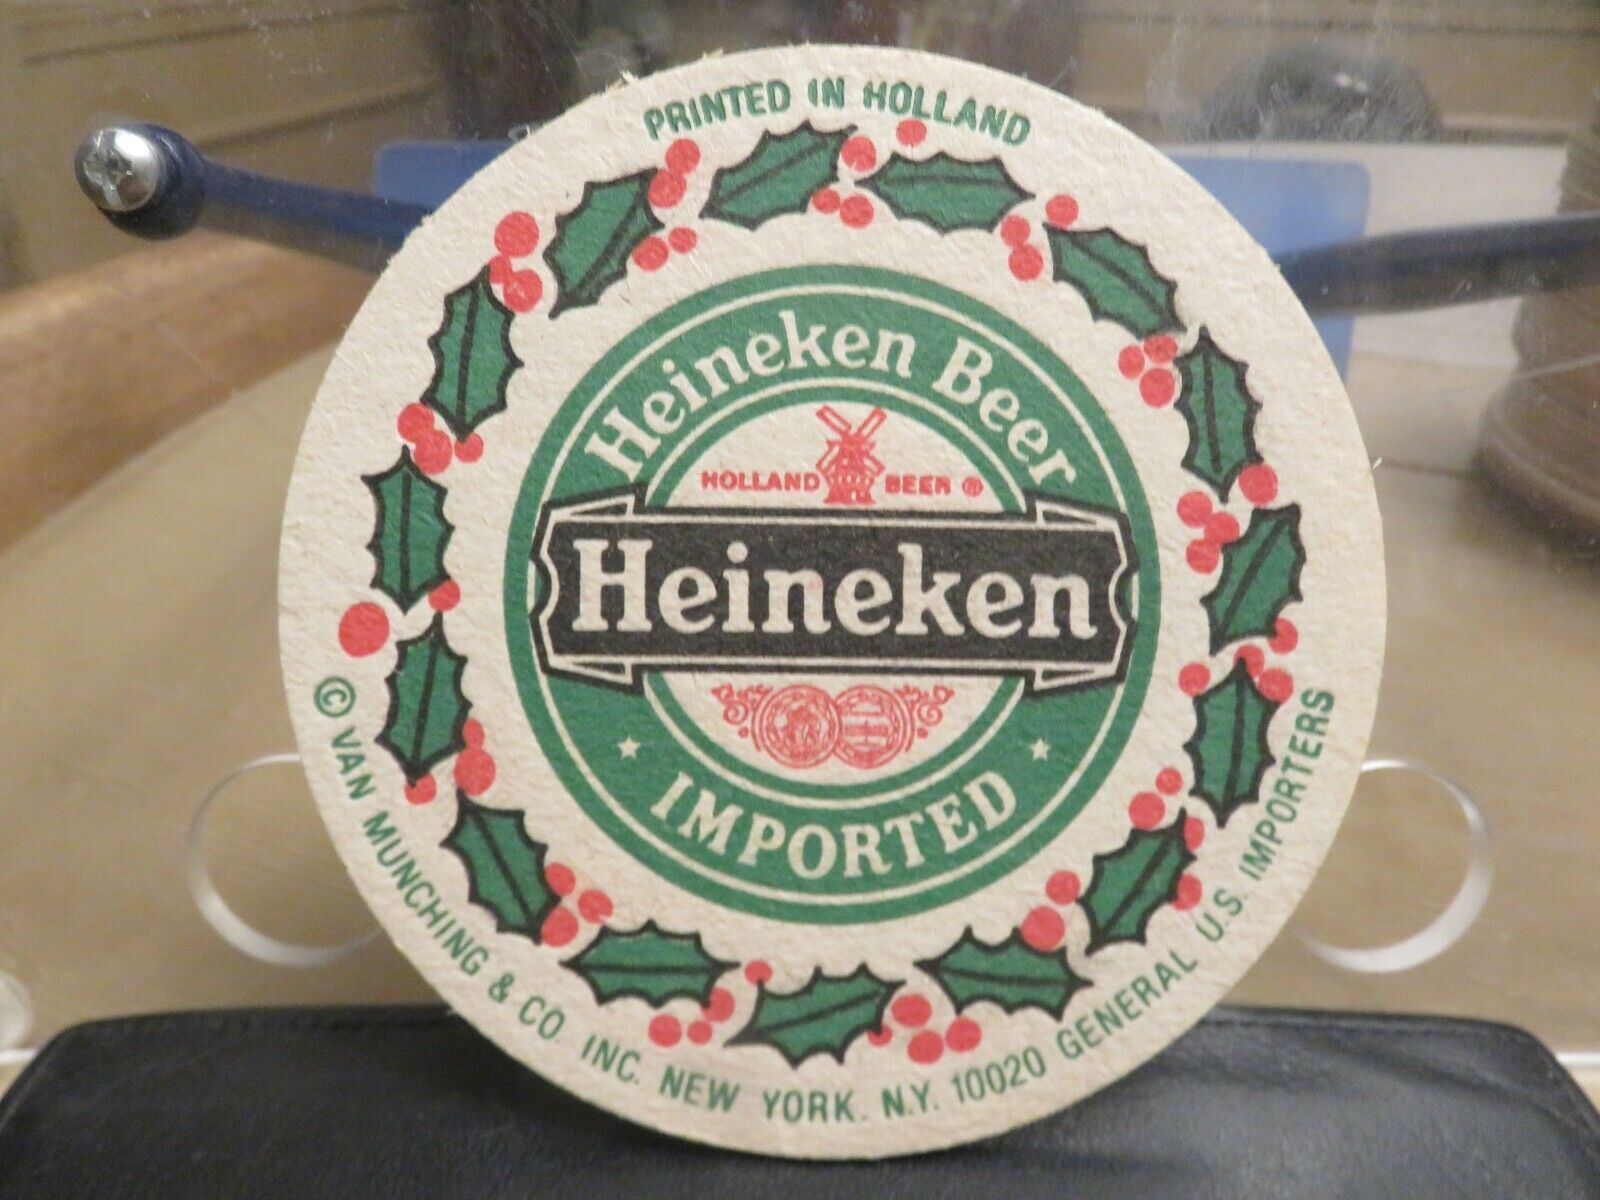 HEINEKEN IMPORTED BEER/AMSTEL LIGHT CHRISTMAS-THEMED DOUBLE-SIDED COASTER 